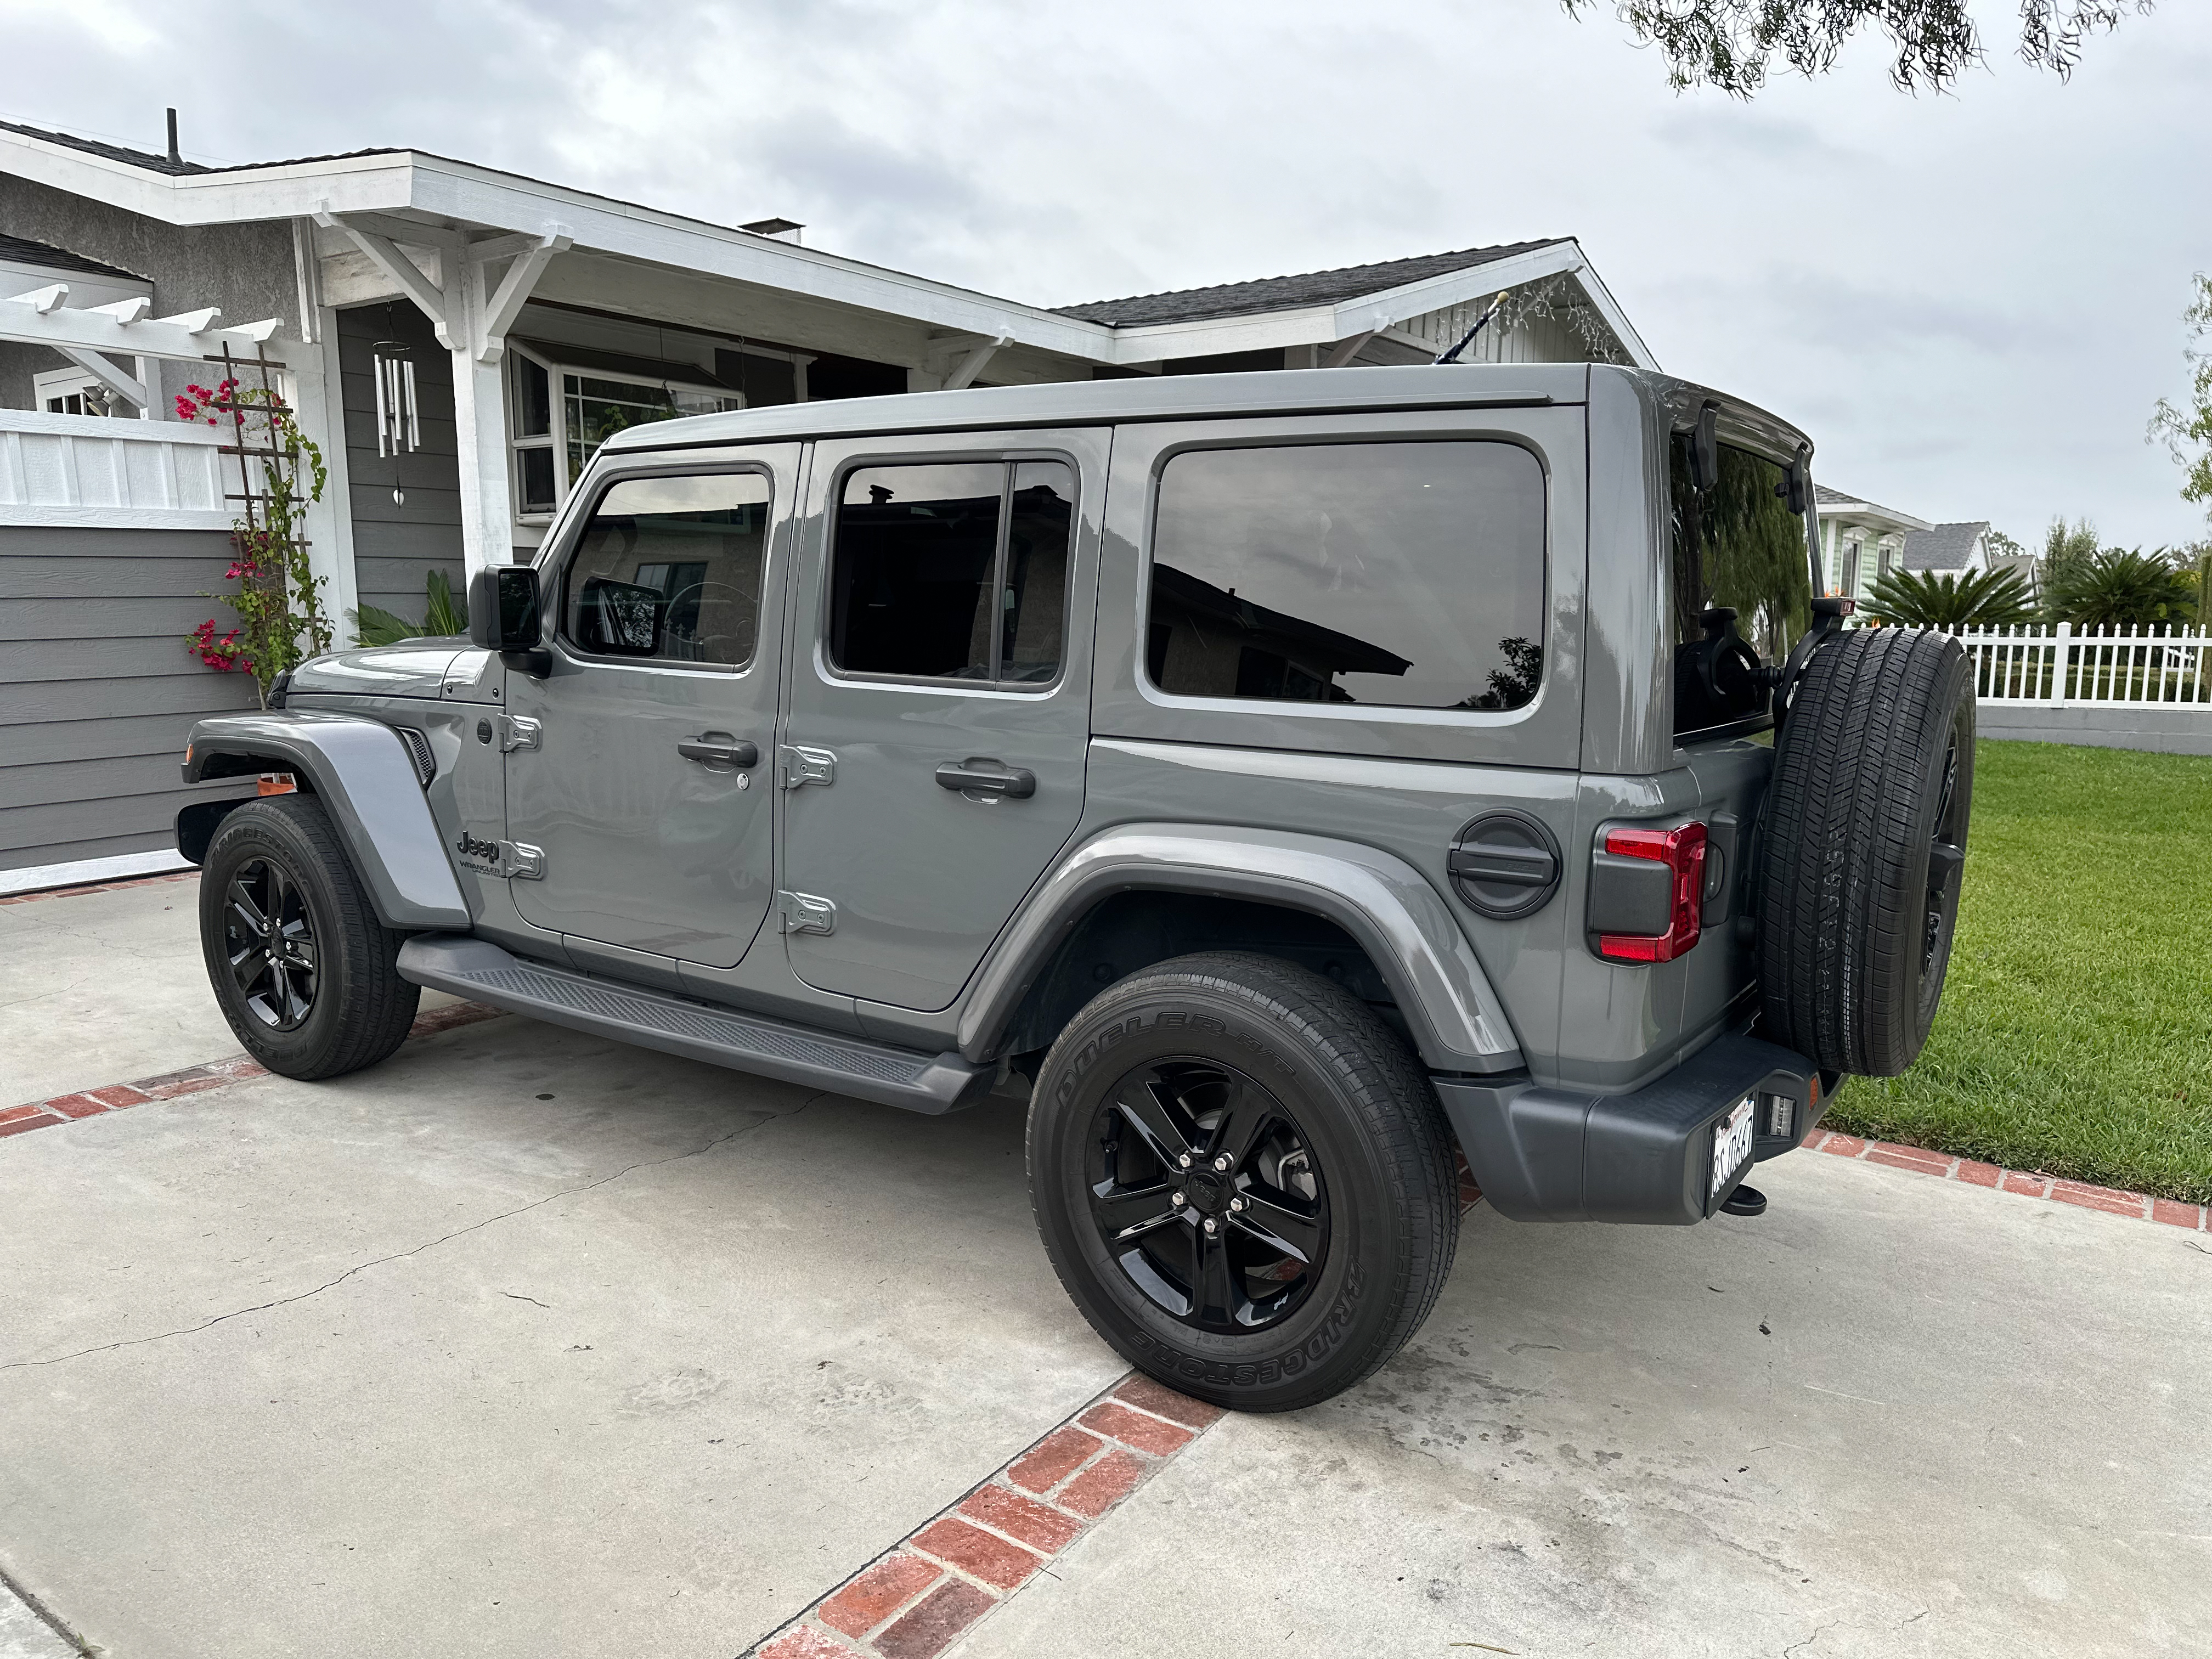 2023 Jeep Wrangler Unlimited: Choosing the Right Trim - Autotrader